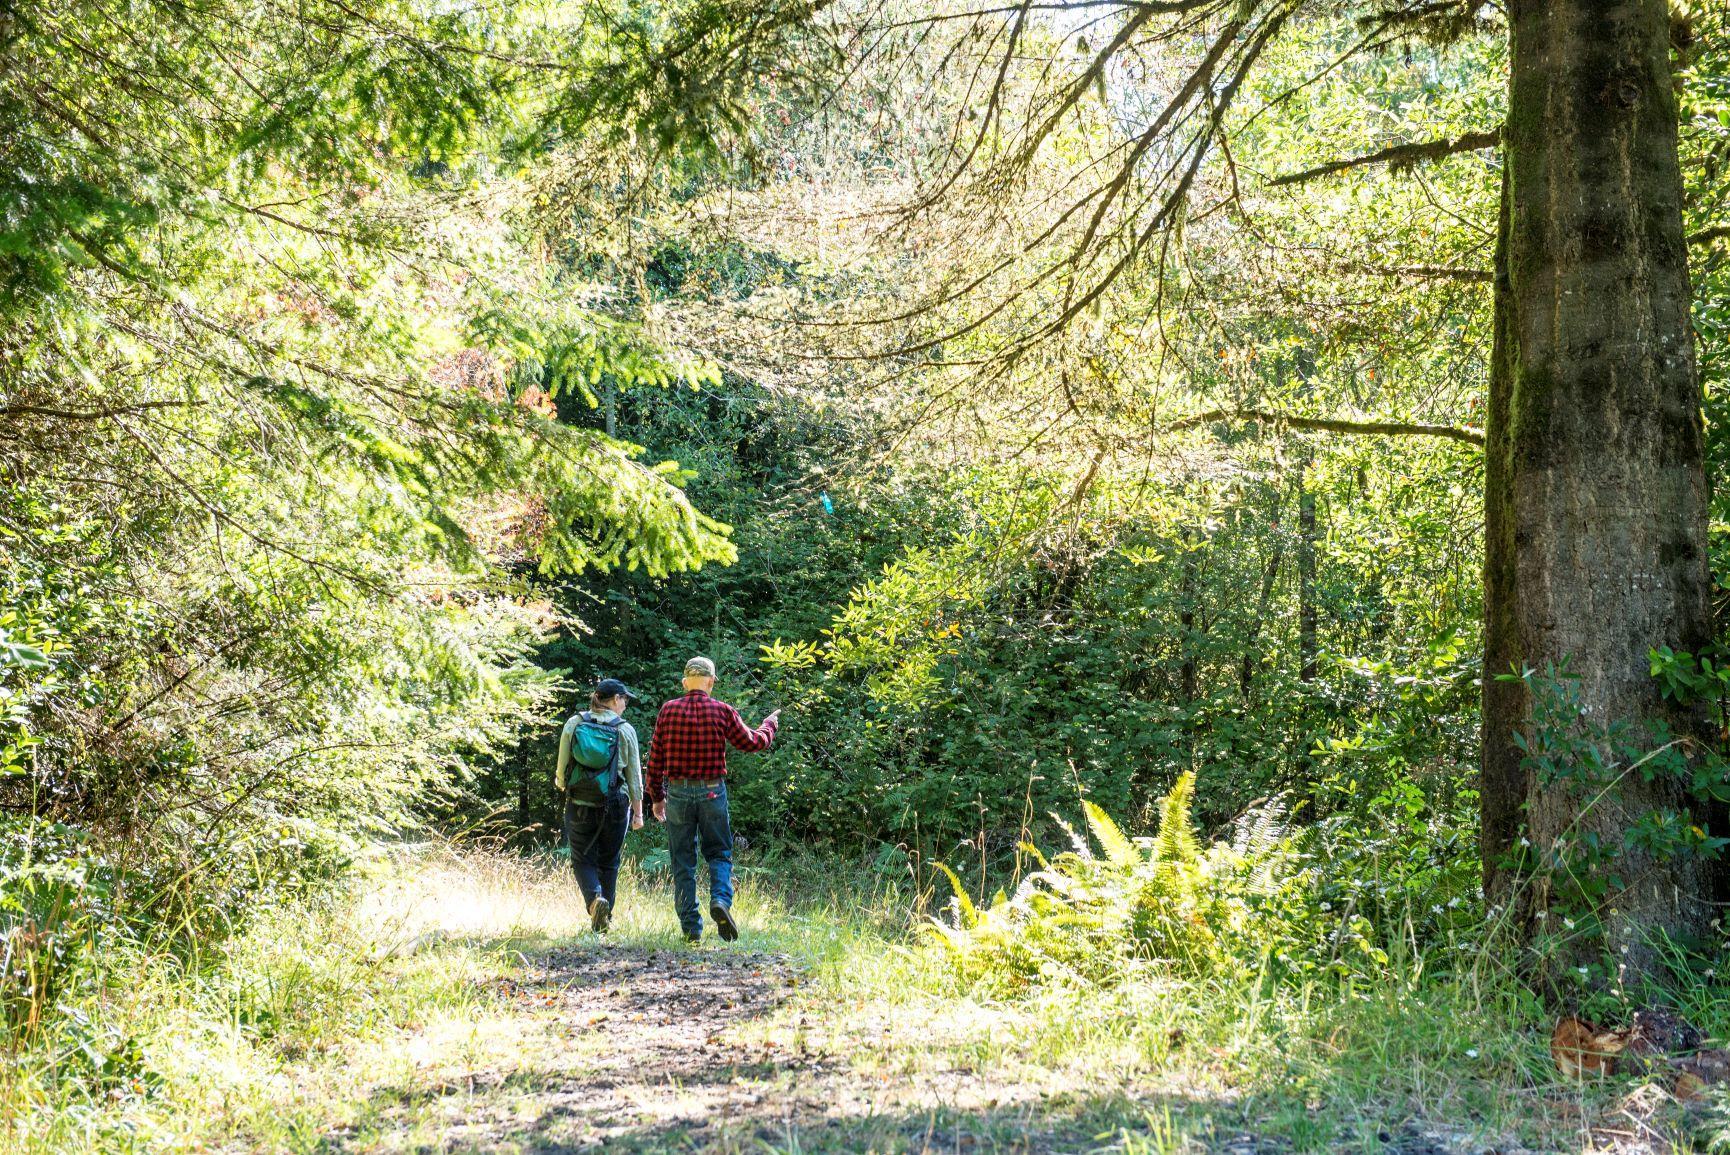 The rear view of a woman and a man walking up a trail bordered by trees and vegetation on both sides.